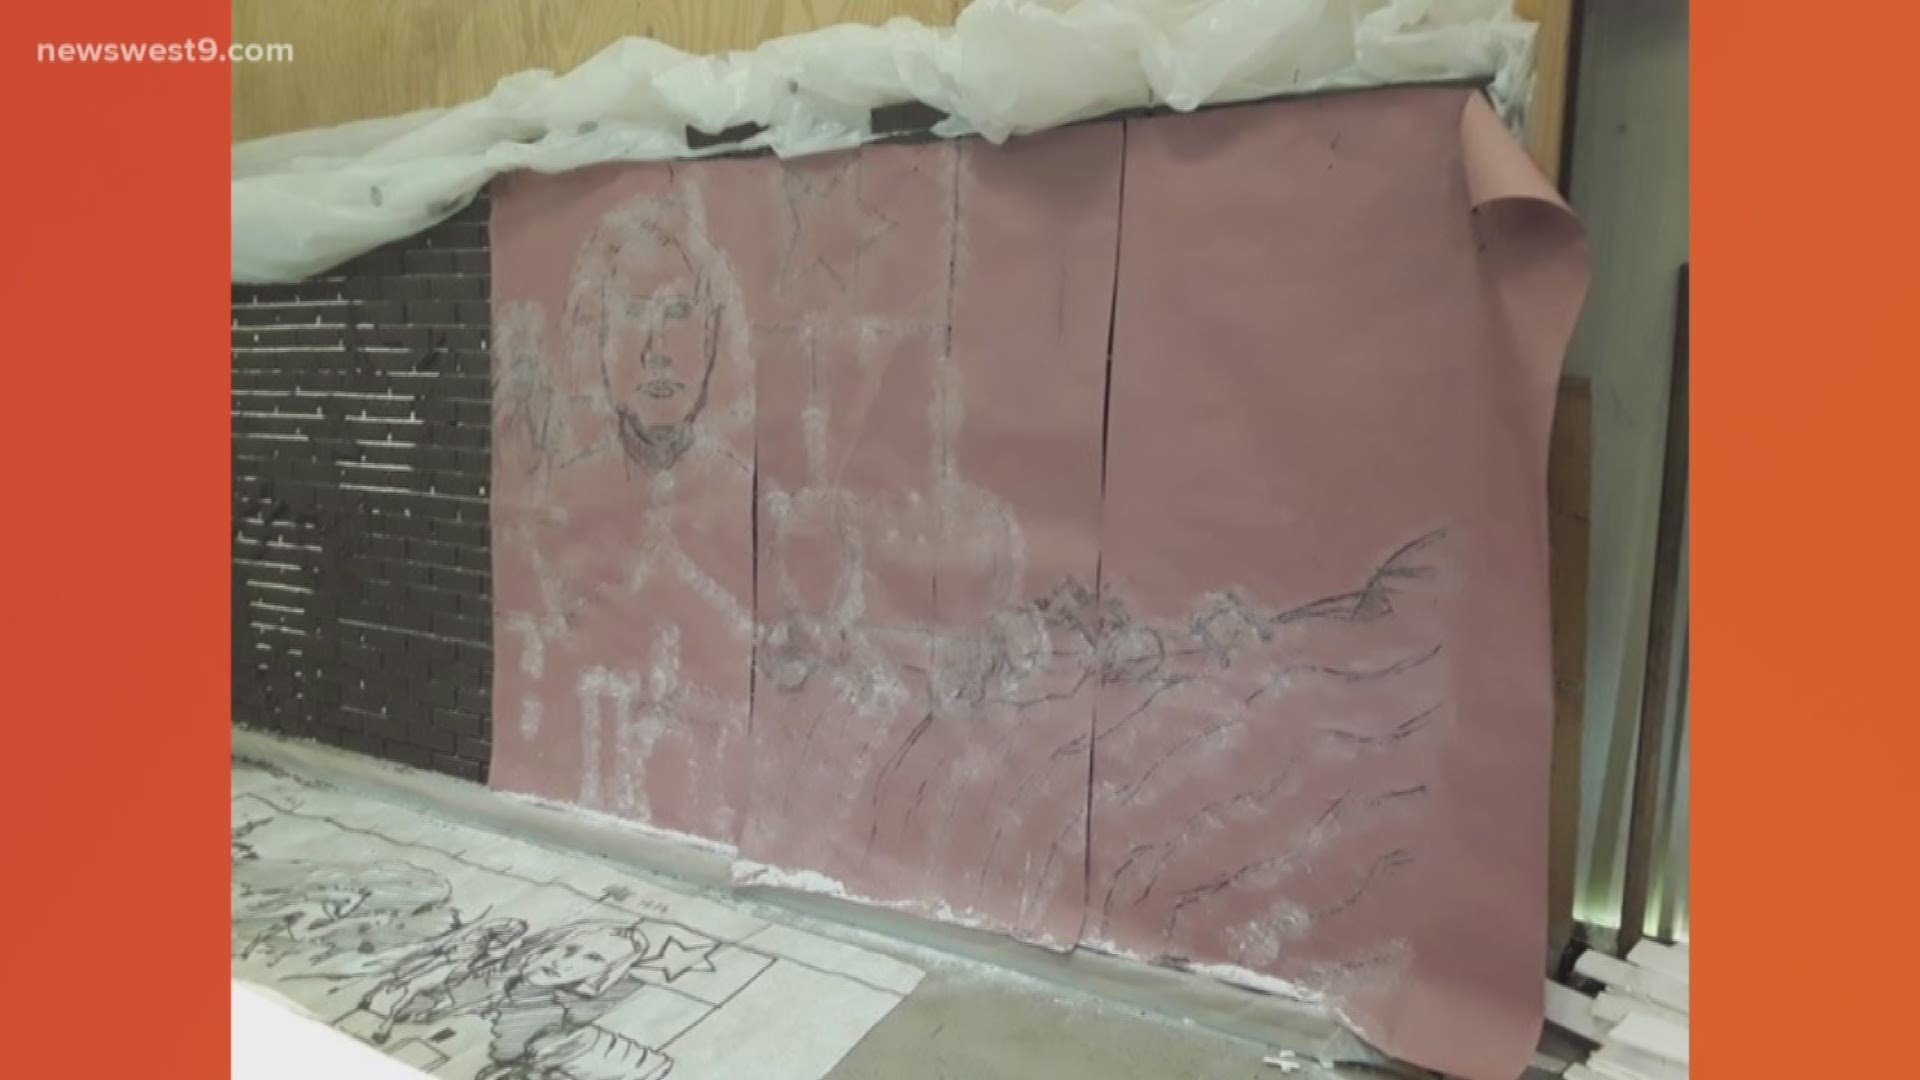 The artist created the wall back in 1985. Now 30 years later she's coming back to spruce up the project for its new home.